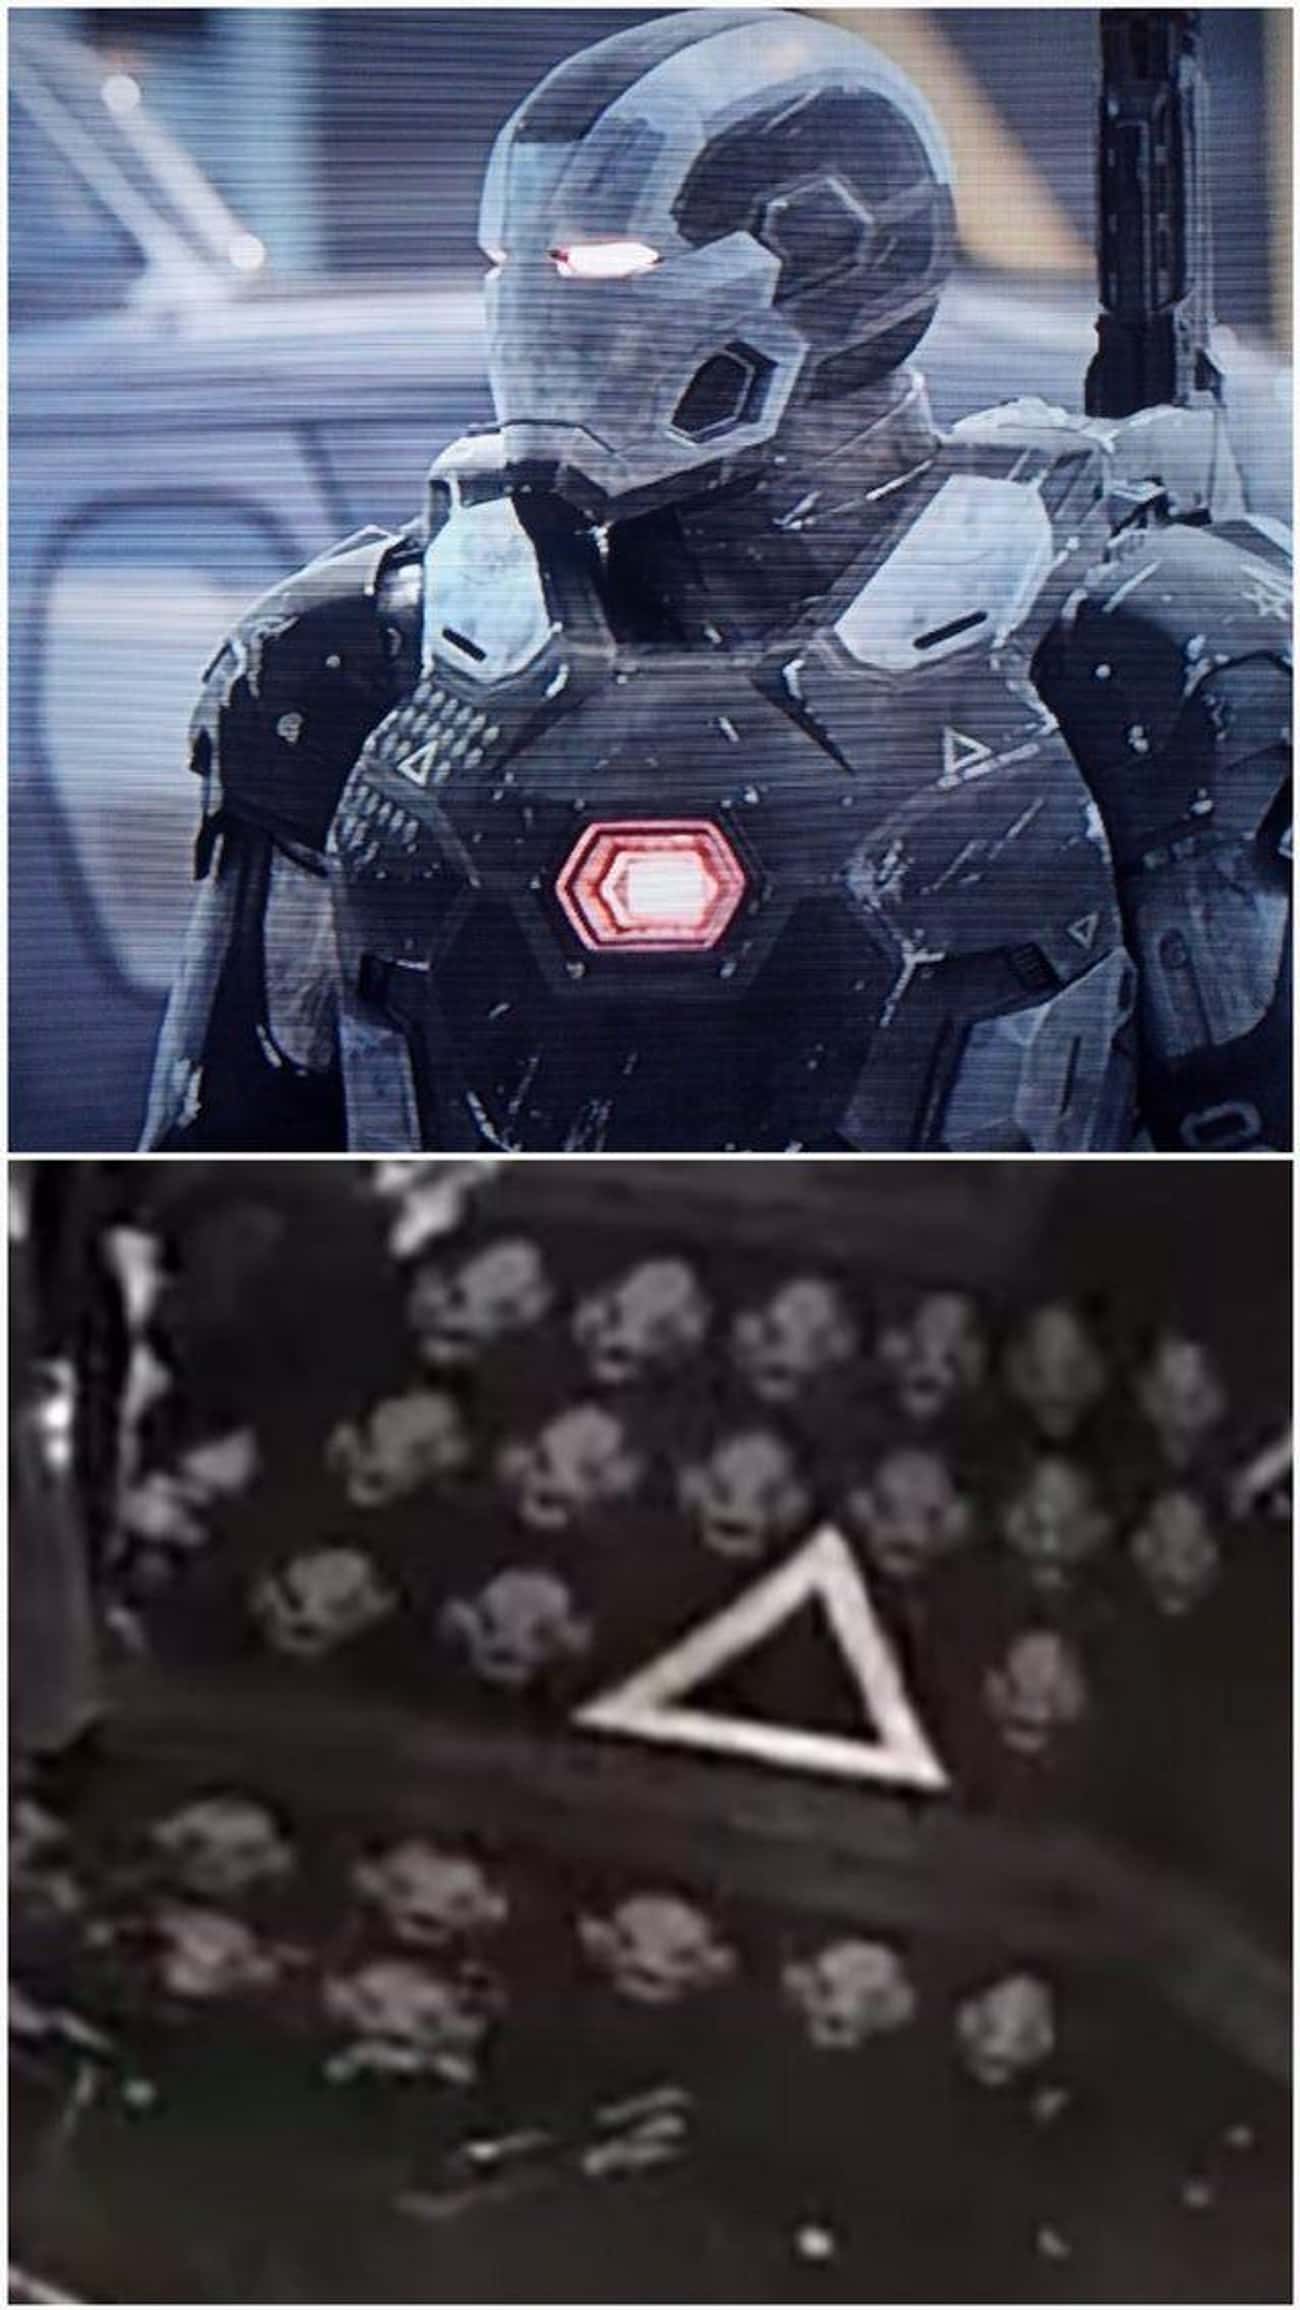 The Icons On War Machine Represent The Number Of Ultron Bots He Took Down